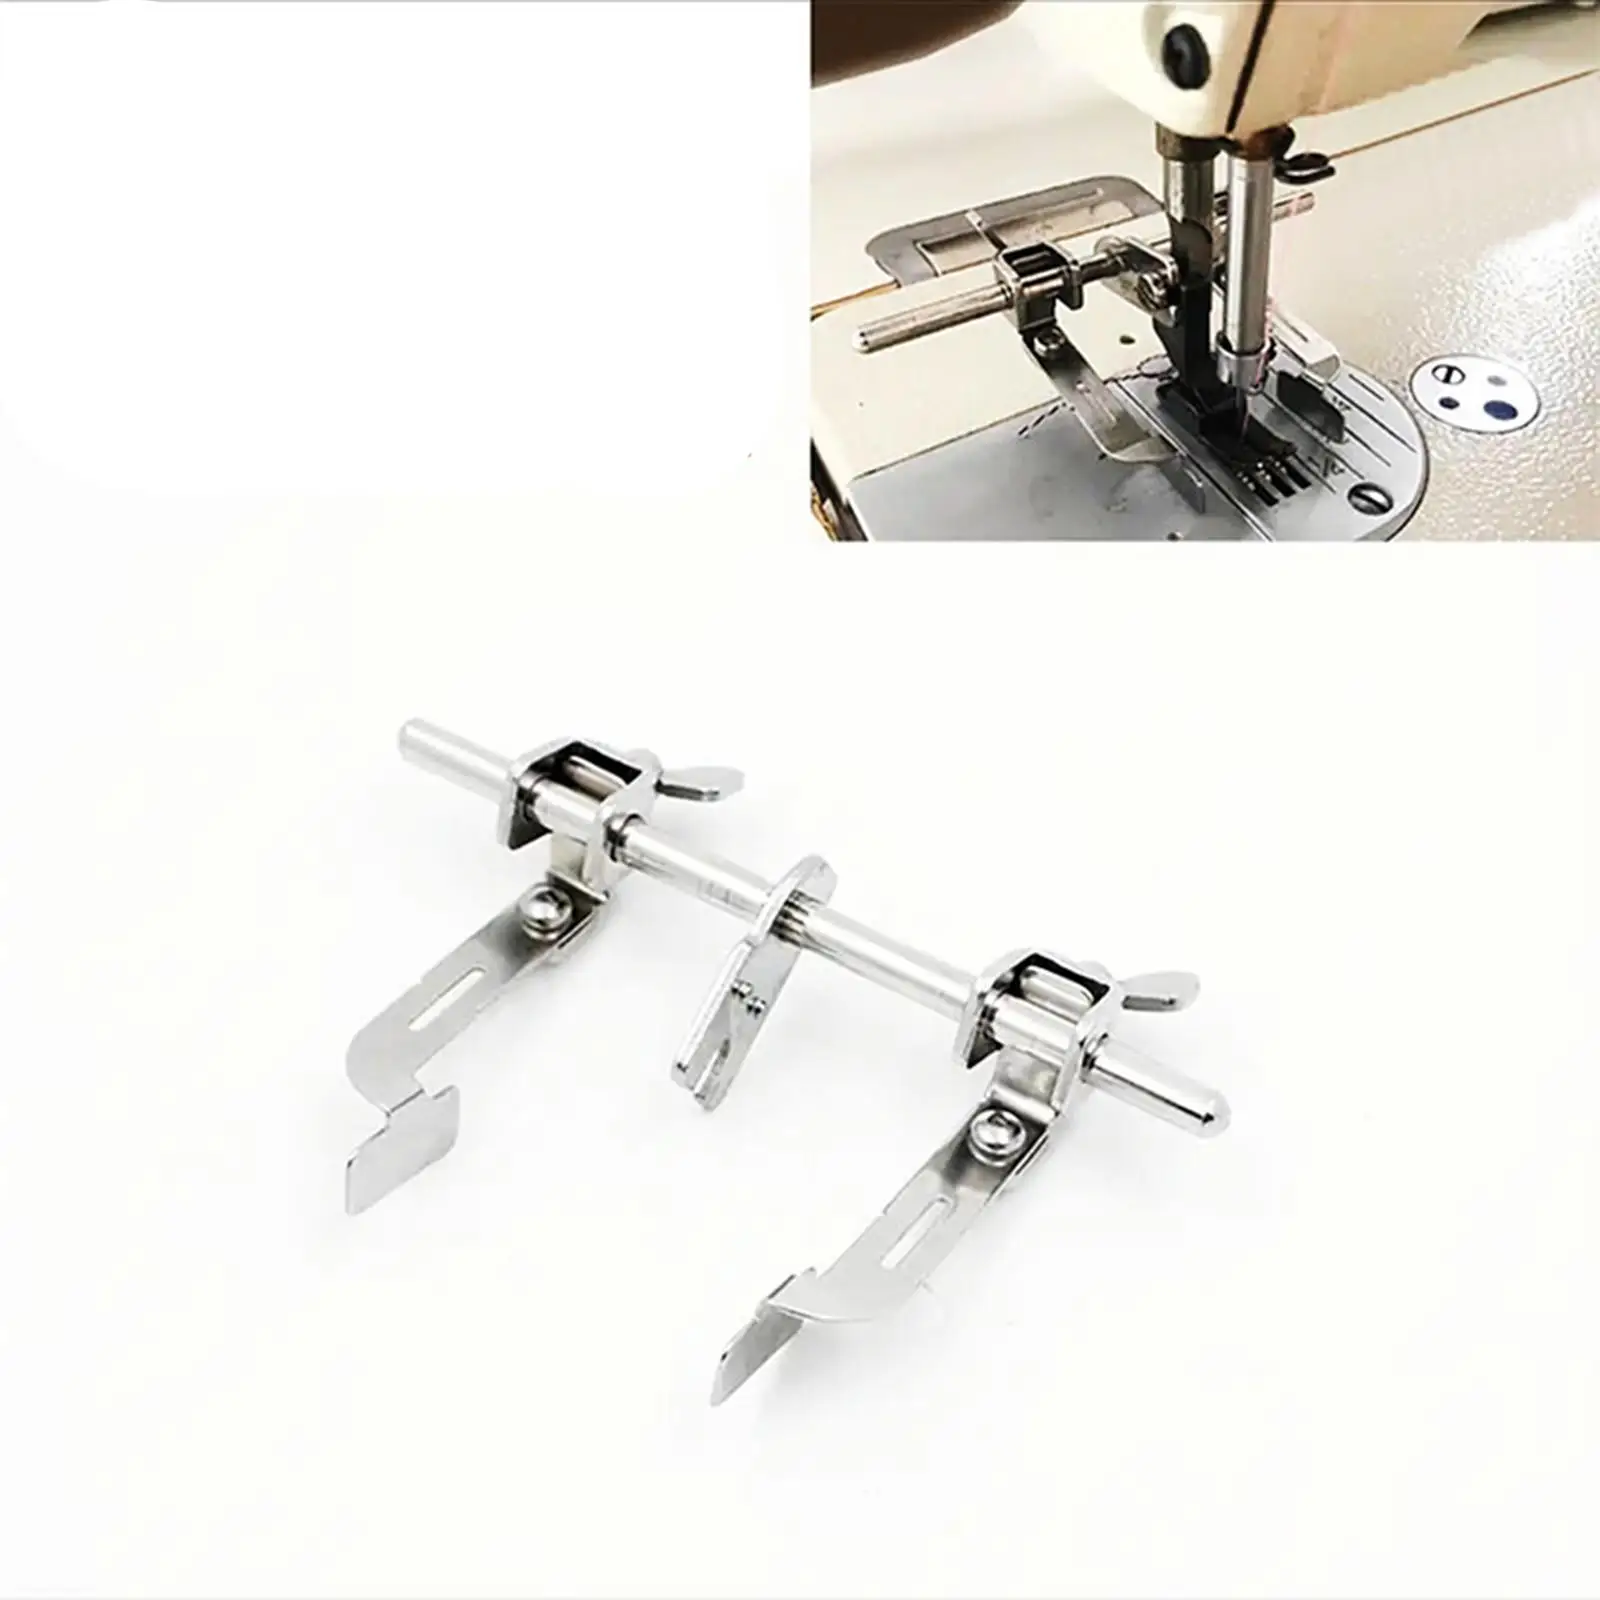 Professional Sewing Machine Presser Foot Steel Linear Positioner Sewing Machine Double Guide Stitch Ruler for Parts Replacement